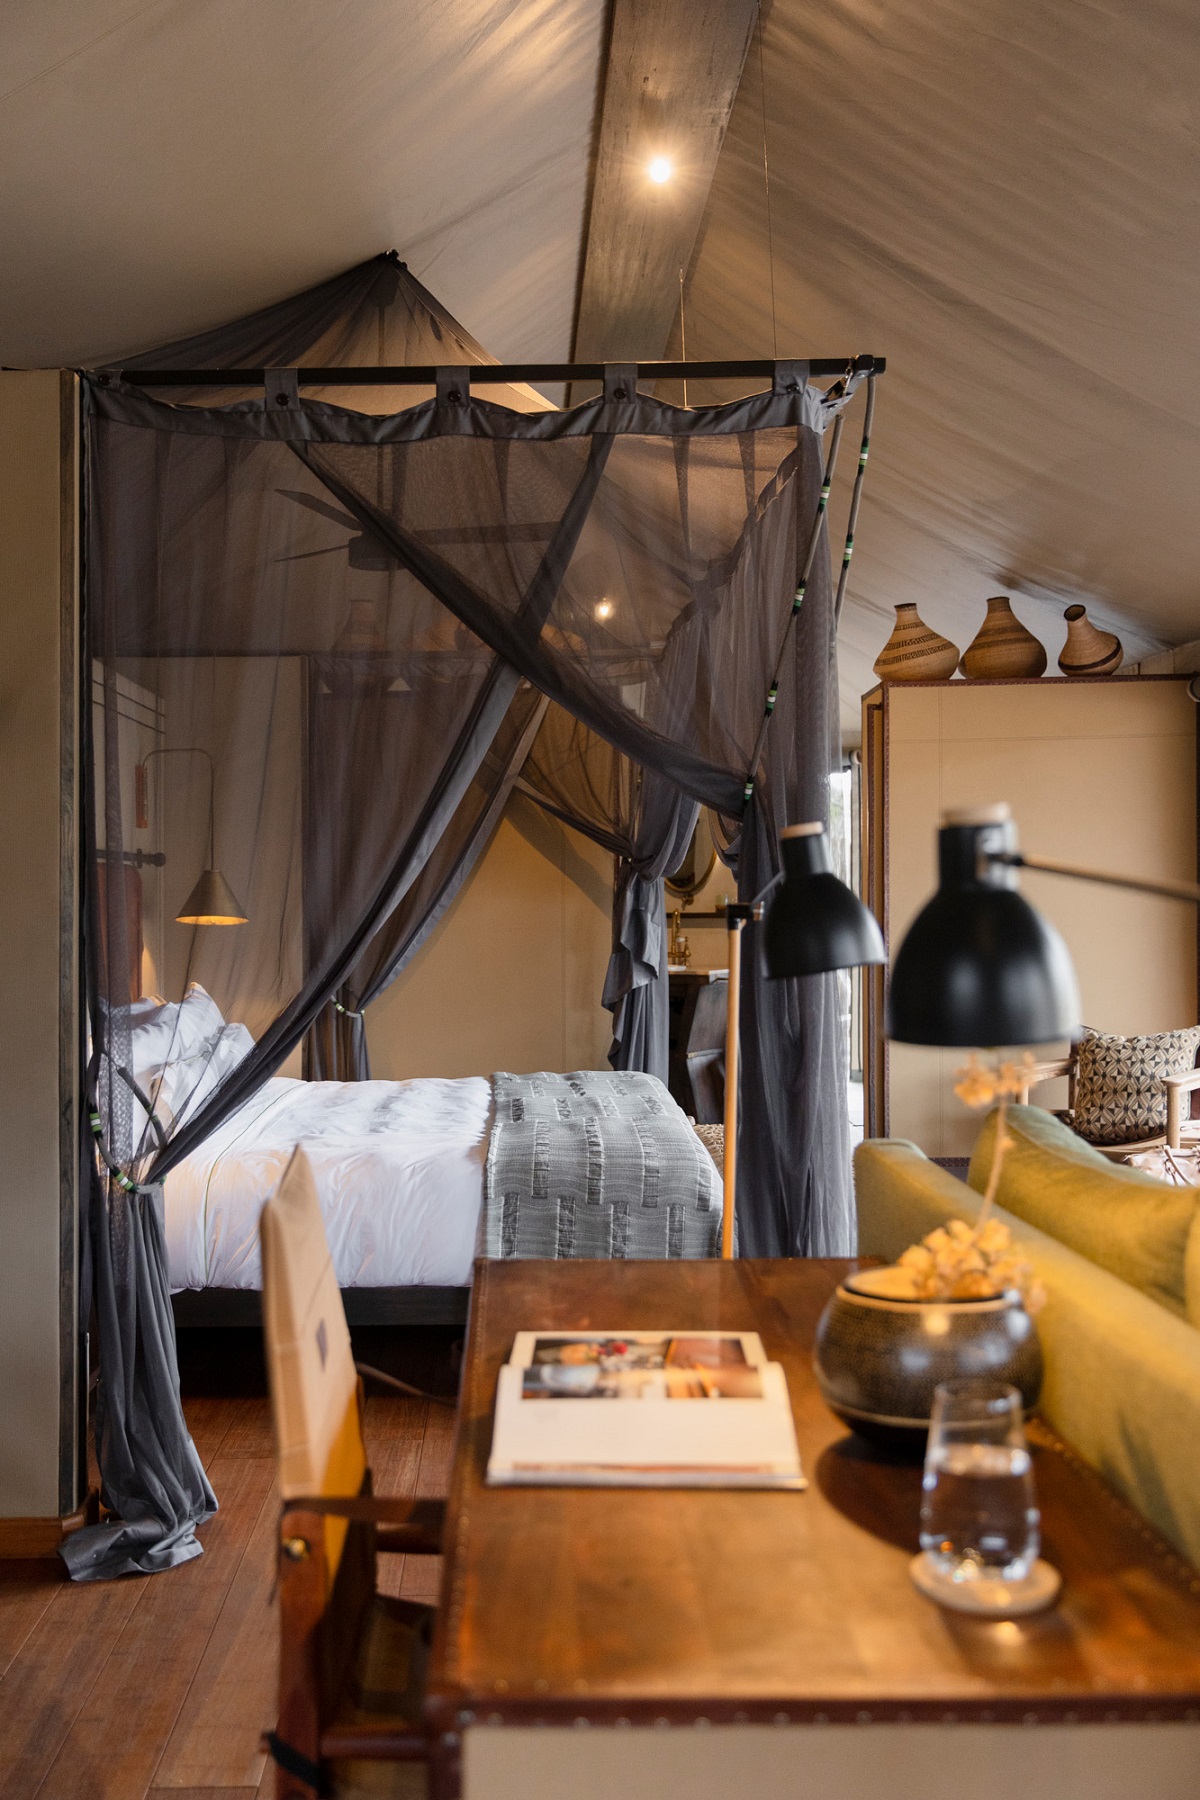 view under tented roof across table to four poster wooden bed